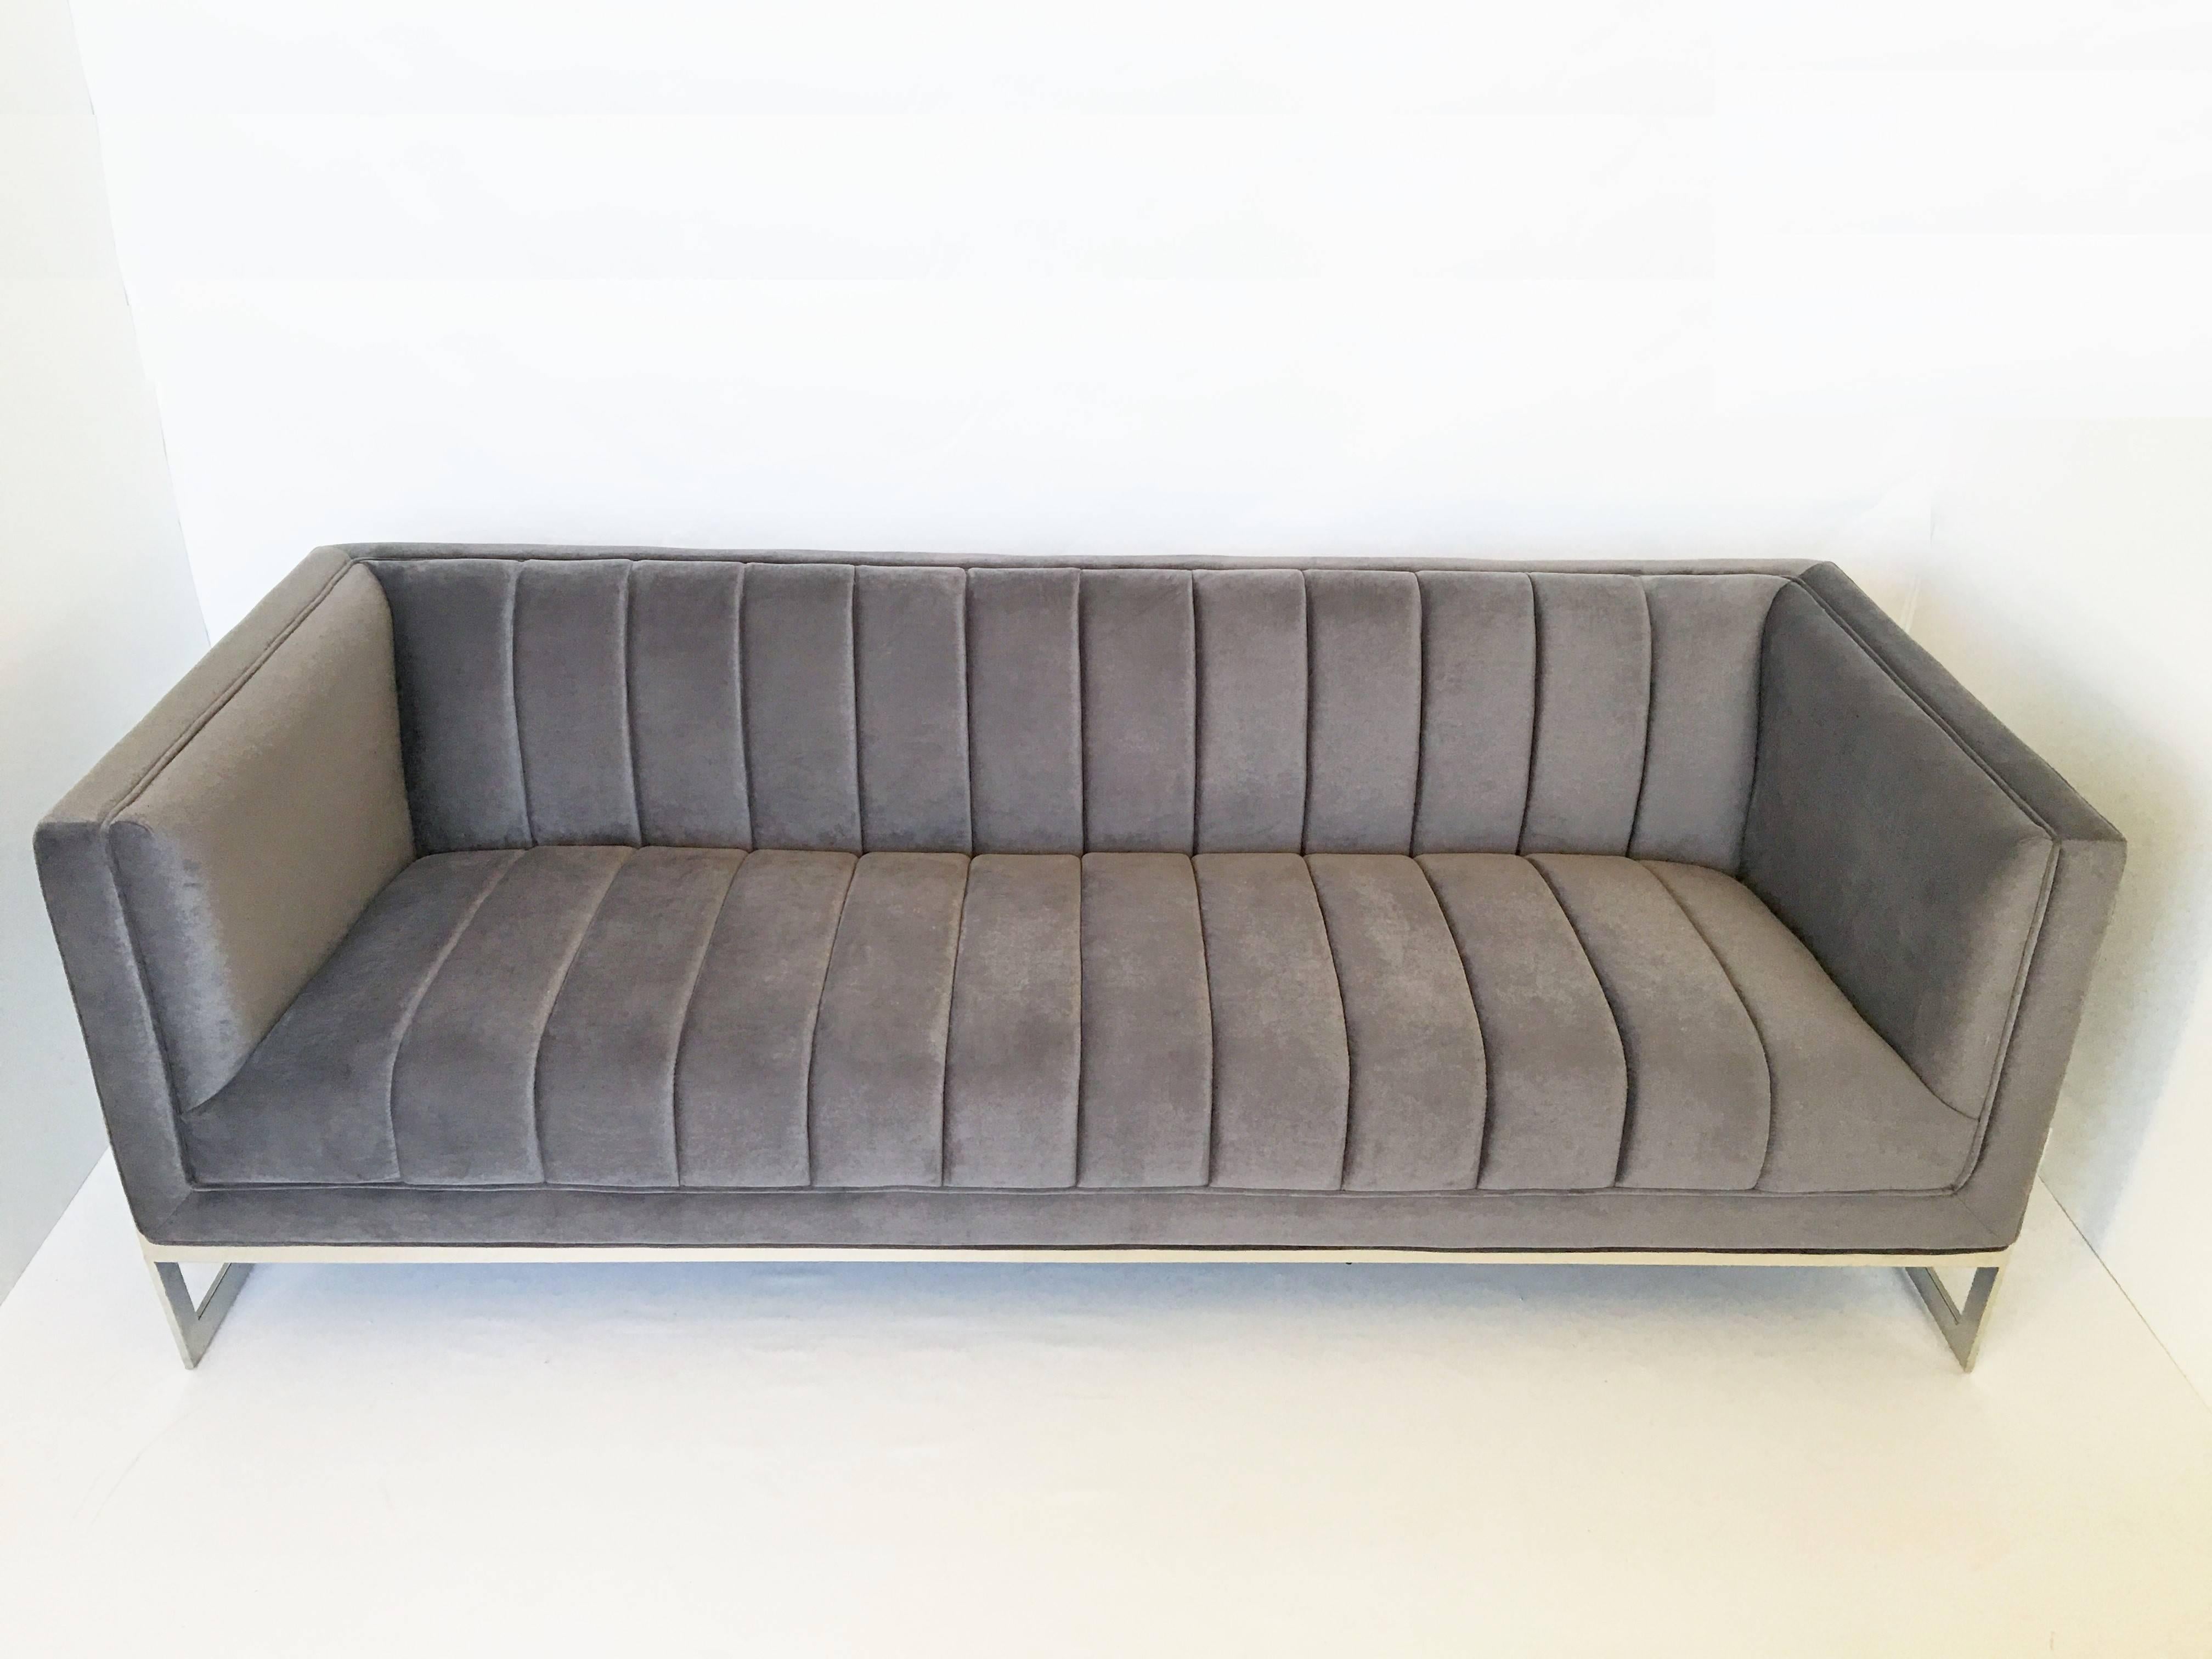 This stunning sofa features a very sleek sophisticated design with channeled seat and back detailing with a chrome frame sofa. Offering a contemporary flair with a touch of sophistication, newly upholstered in velvet this sofa is unique yet